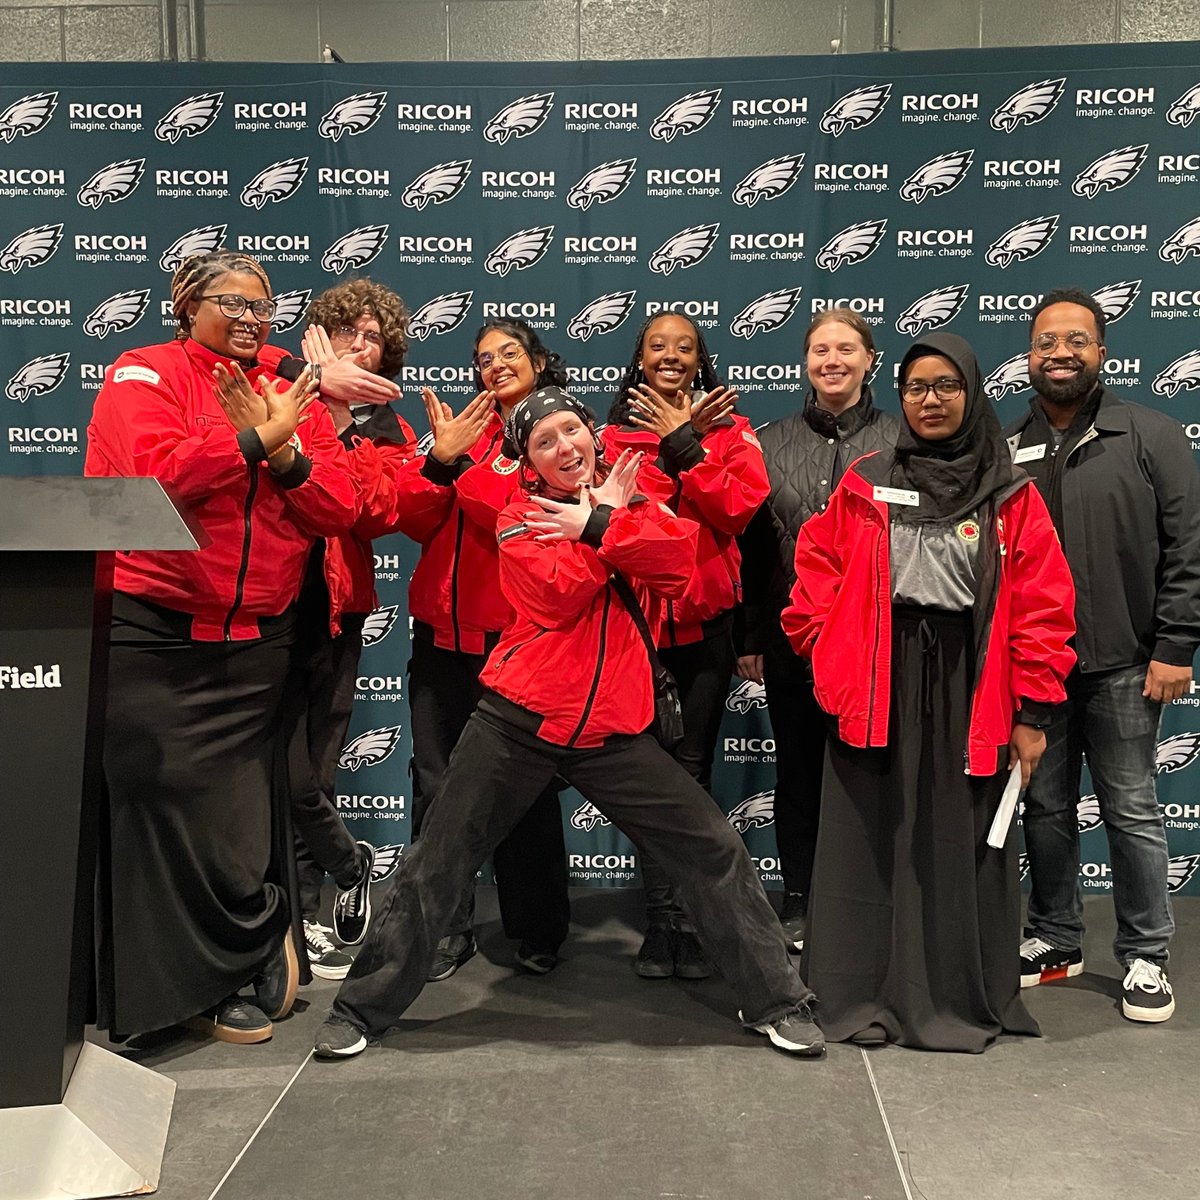 Our @southwarkschool team recently scored a touchdown with a behind-the-scenes tour of Lincoln Financial Field, home of the @Eagles! Huge thanks to our Team Sponsor, @lincolnfingroup, for this incredible experience.